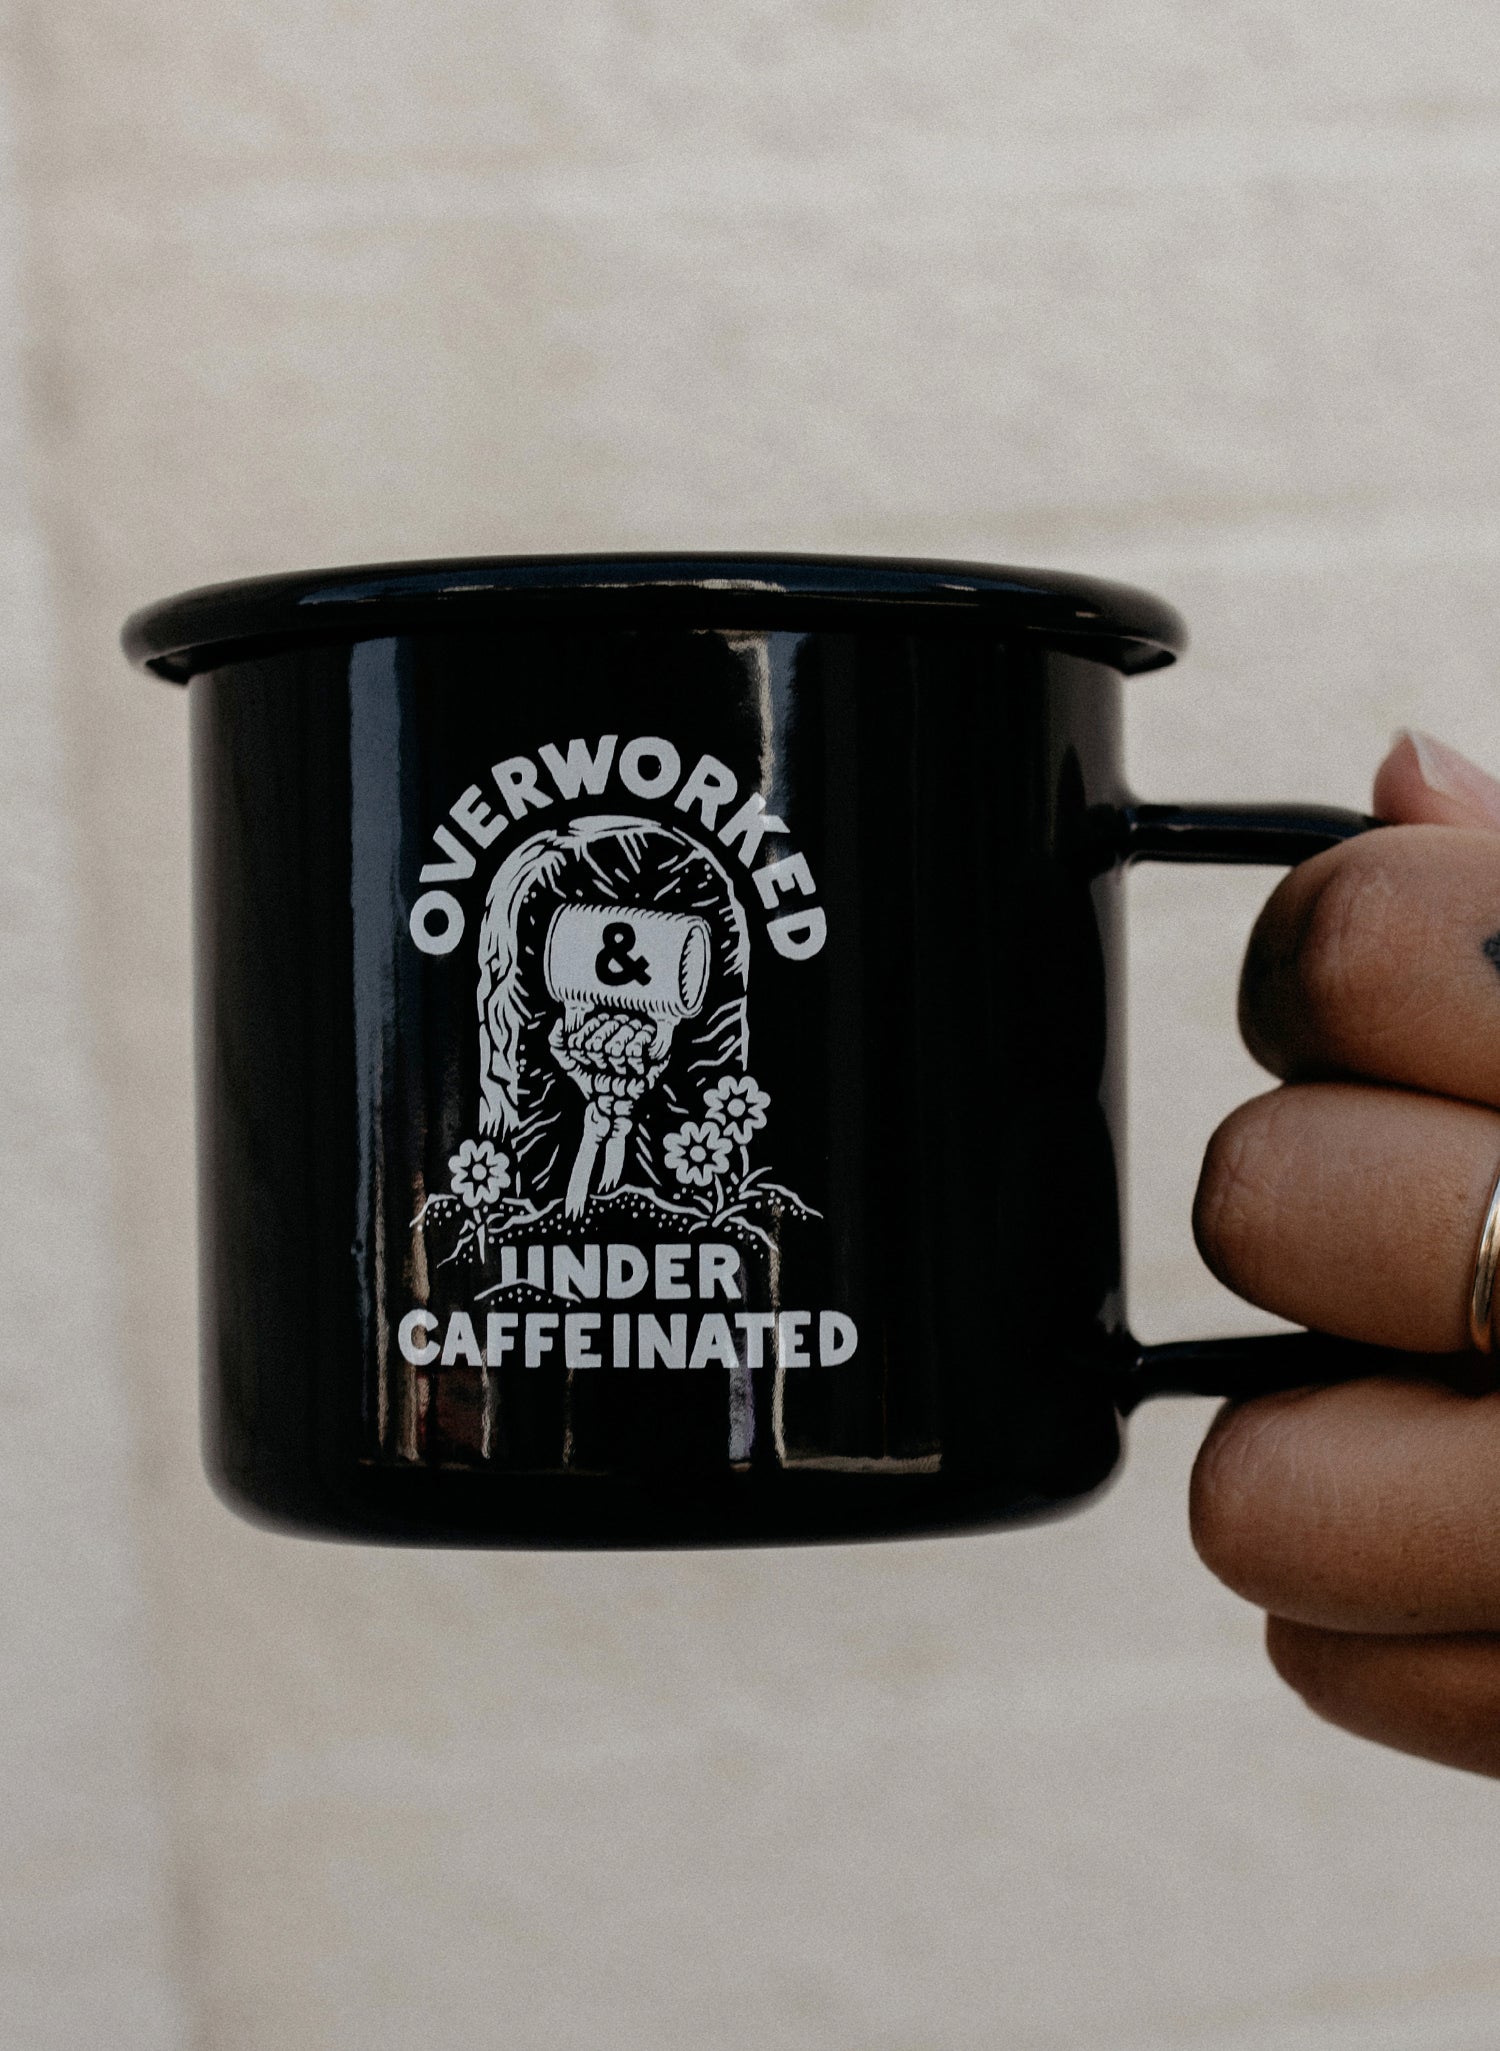 Overworked Under Caffeinated Black Enamel Camping Mug for Coffee or Tea | Co-Worker or Boss Gift | Foodie Gift | Cool Reusable Coffee Mug | Pyknic